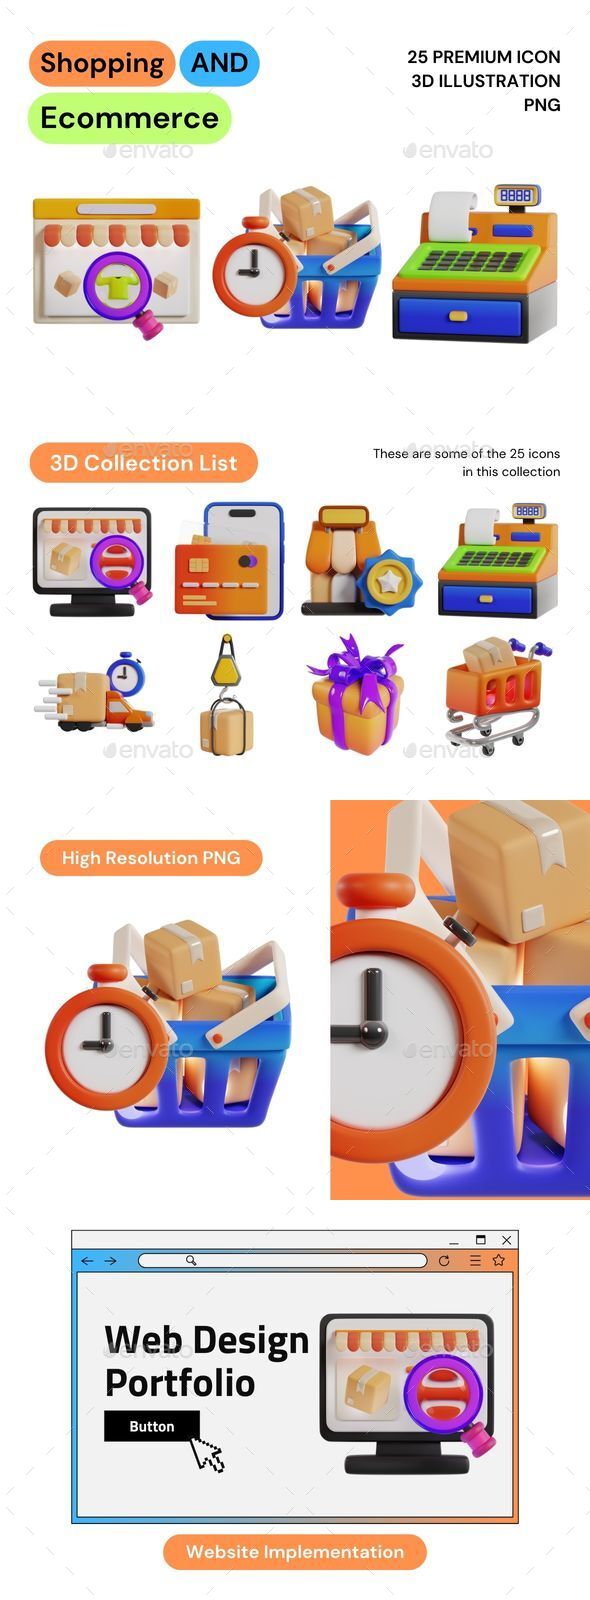 Shopping and Selling 3D Illustration